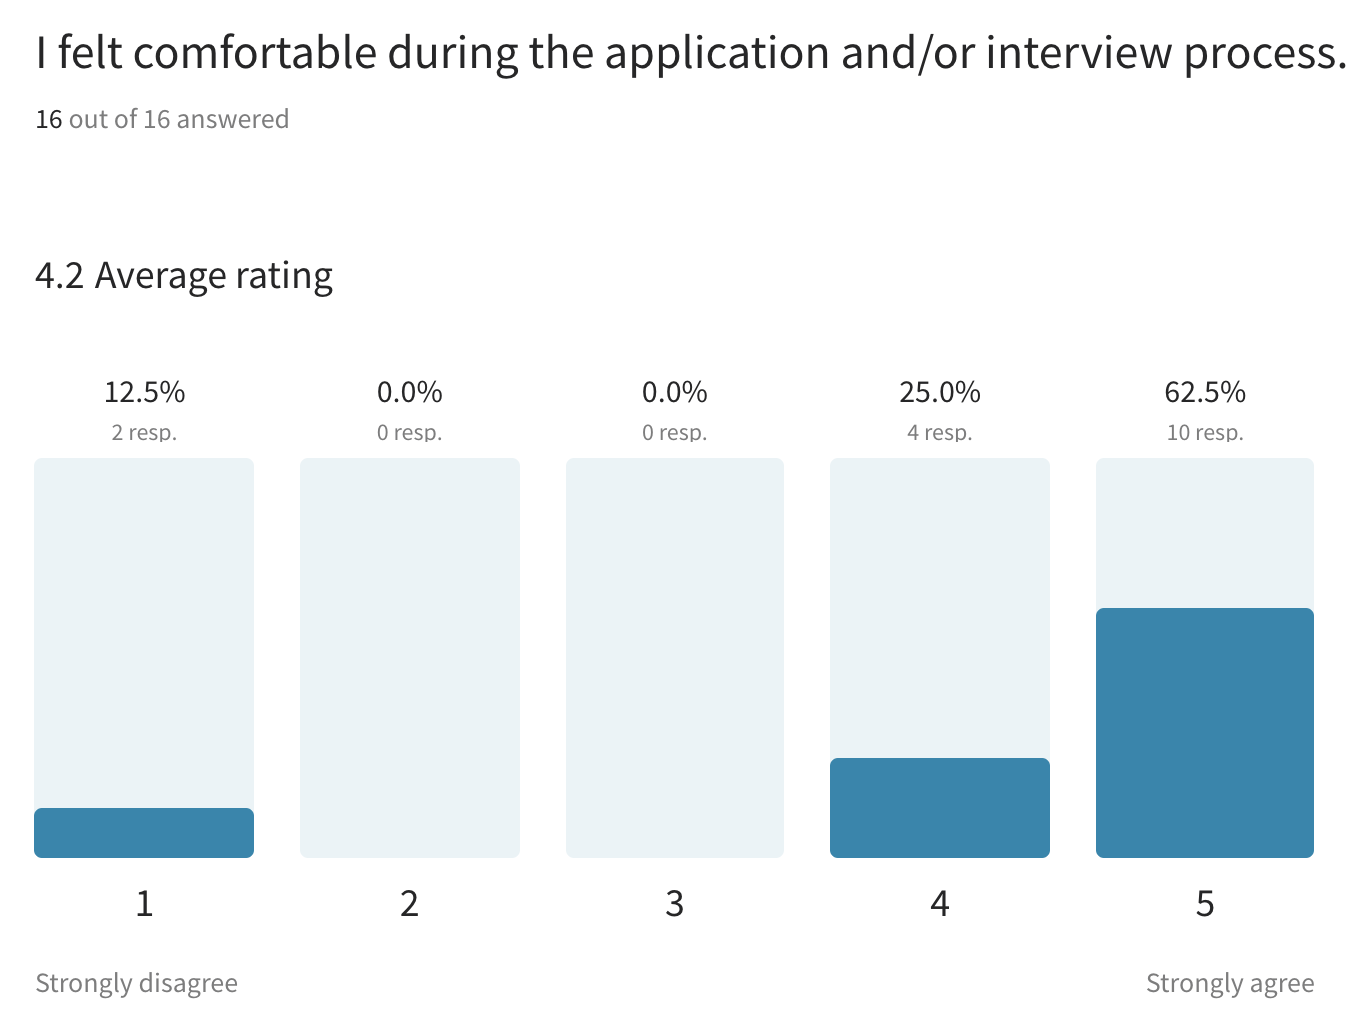 A screenshot of the candidate experience survey results which shows a bar chart illustrating a majority of respondents felt comfortable during the interview process.